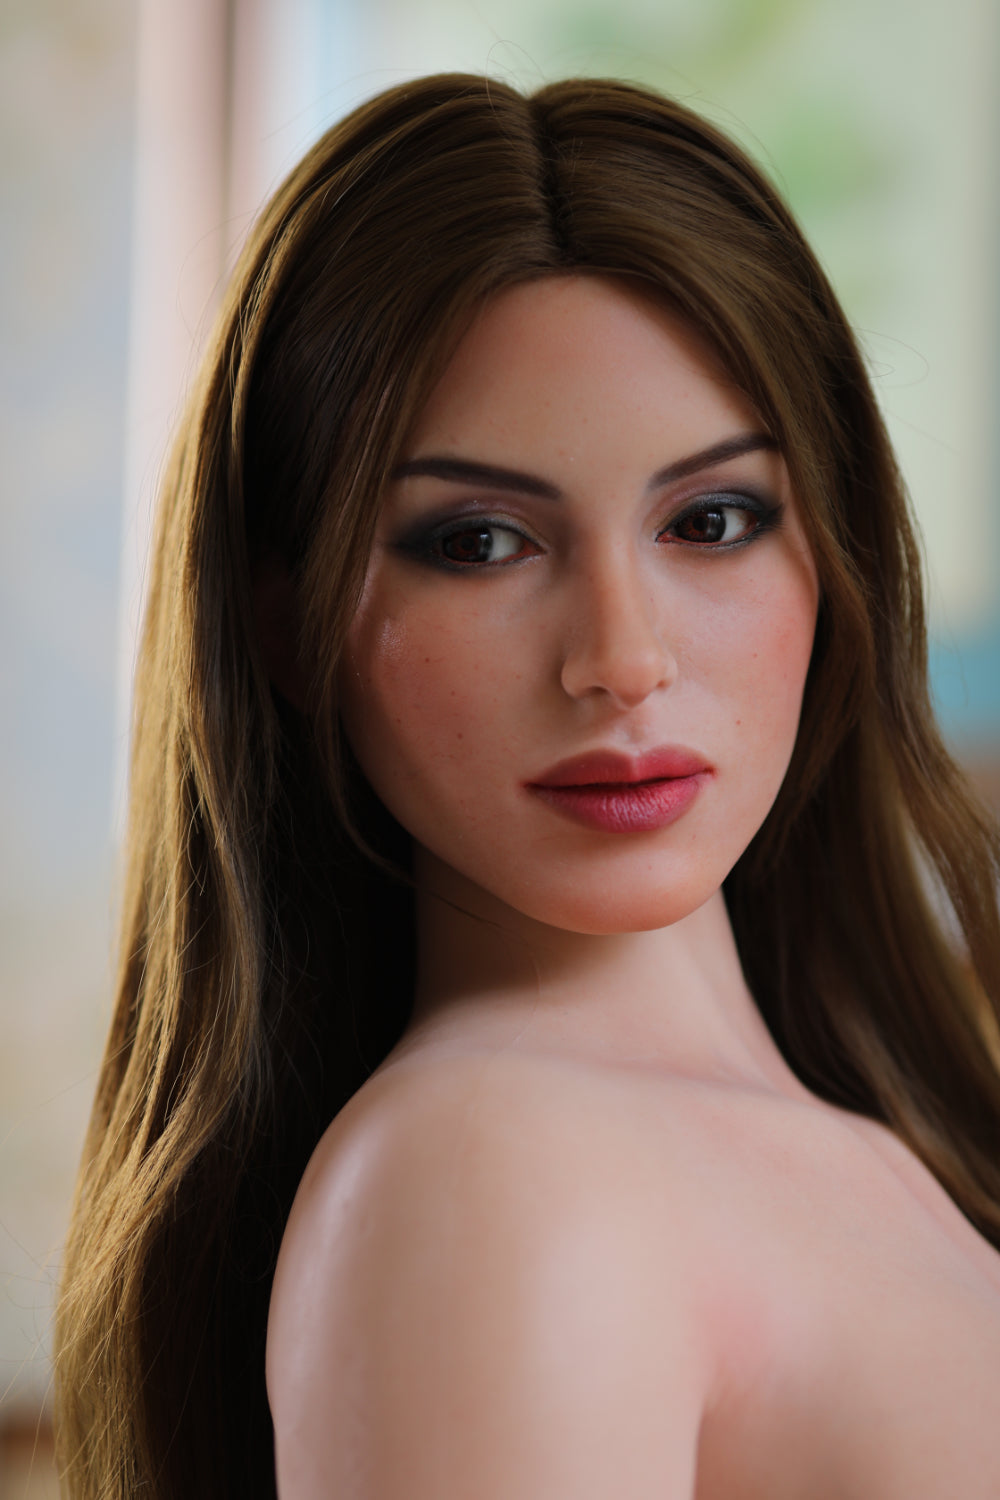 Starpery 153 cm E - Adele | Buy Sex Dolls at DOLLS ACTUALLY